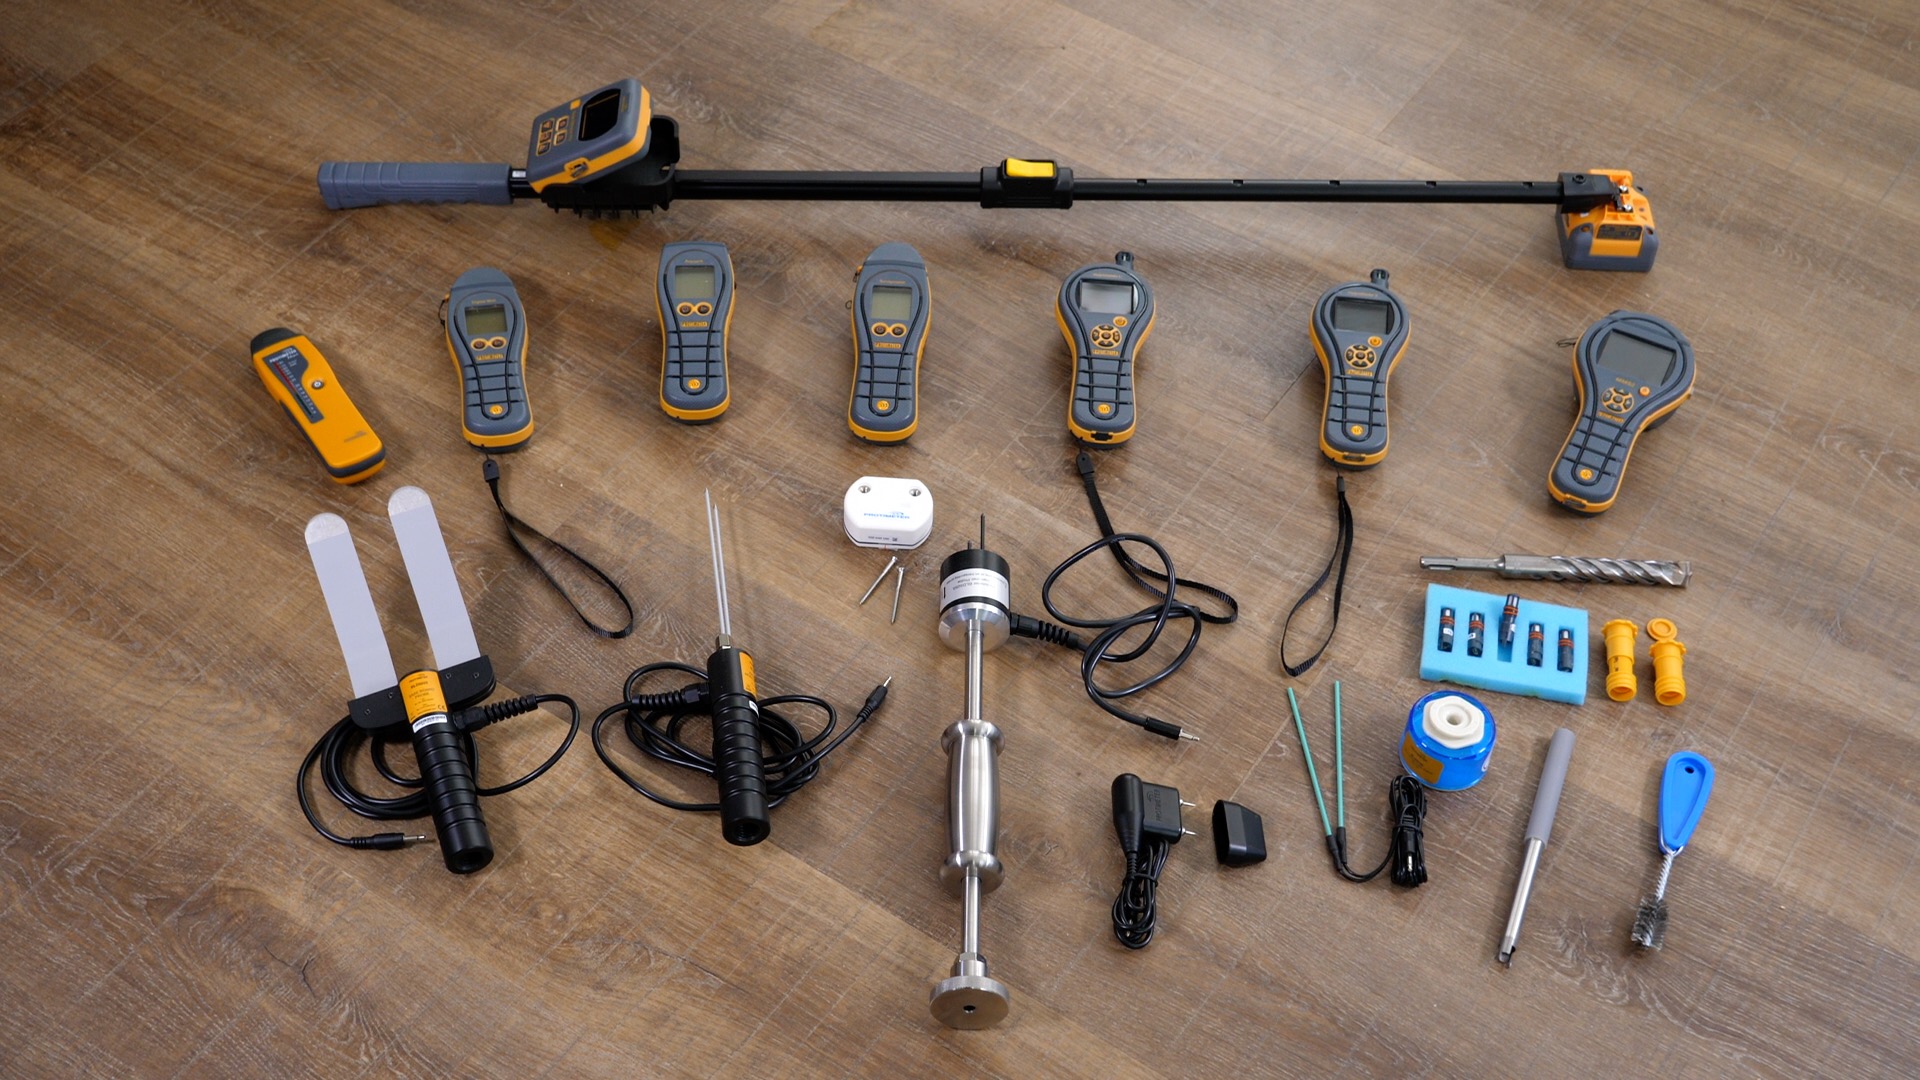 Damp Testing Equipment Every Home Inspector Needs in Their Toolkit